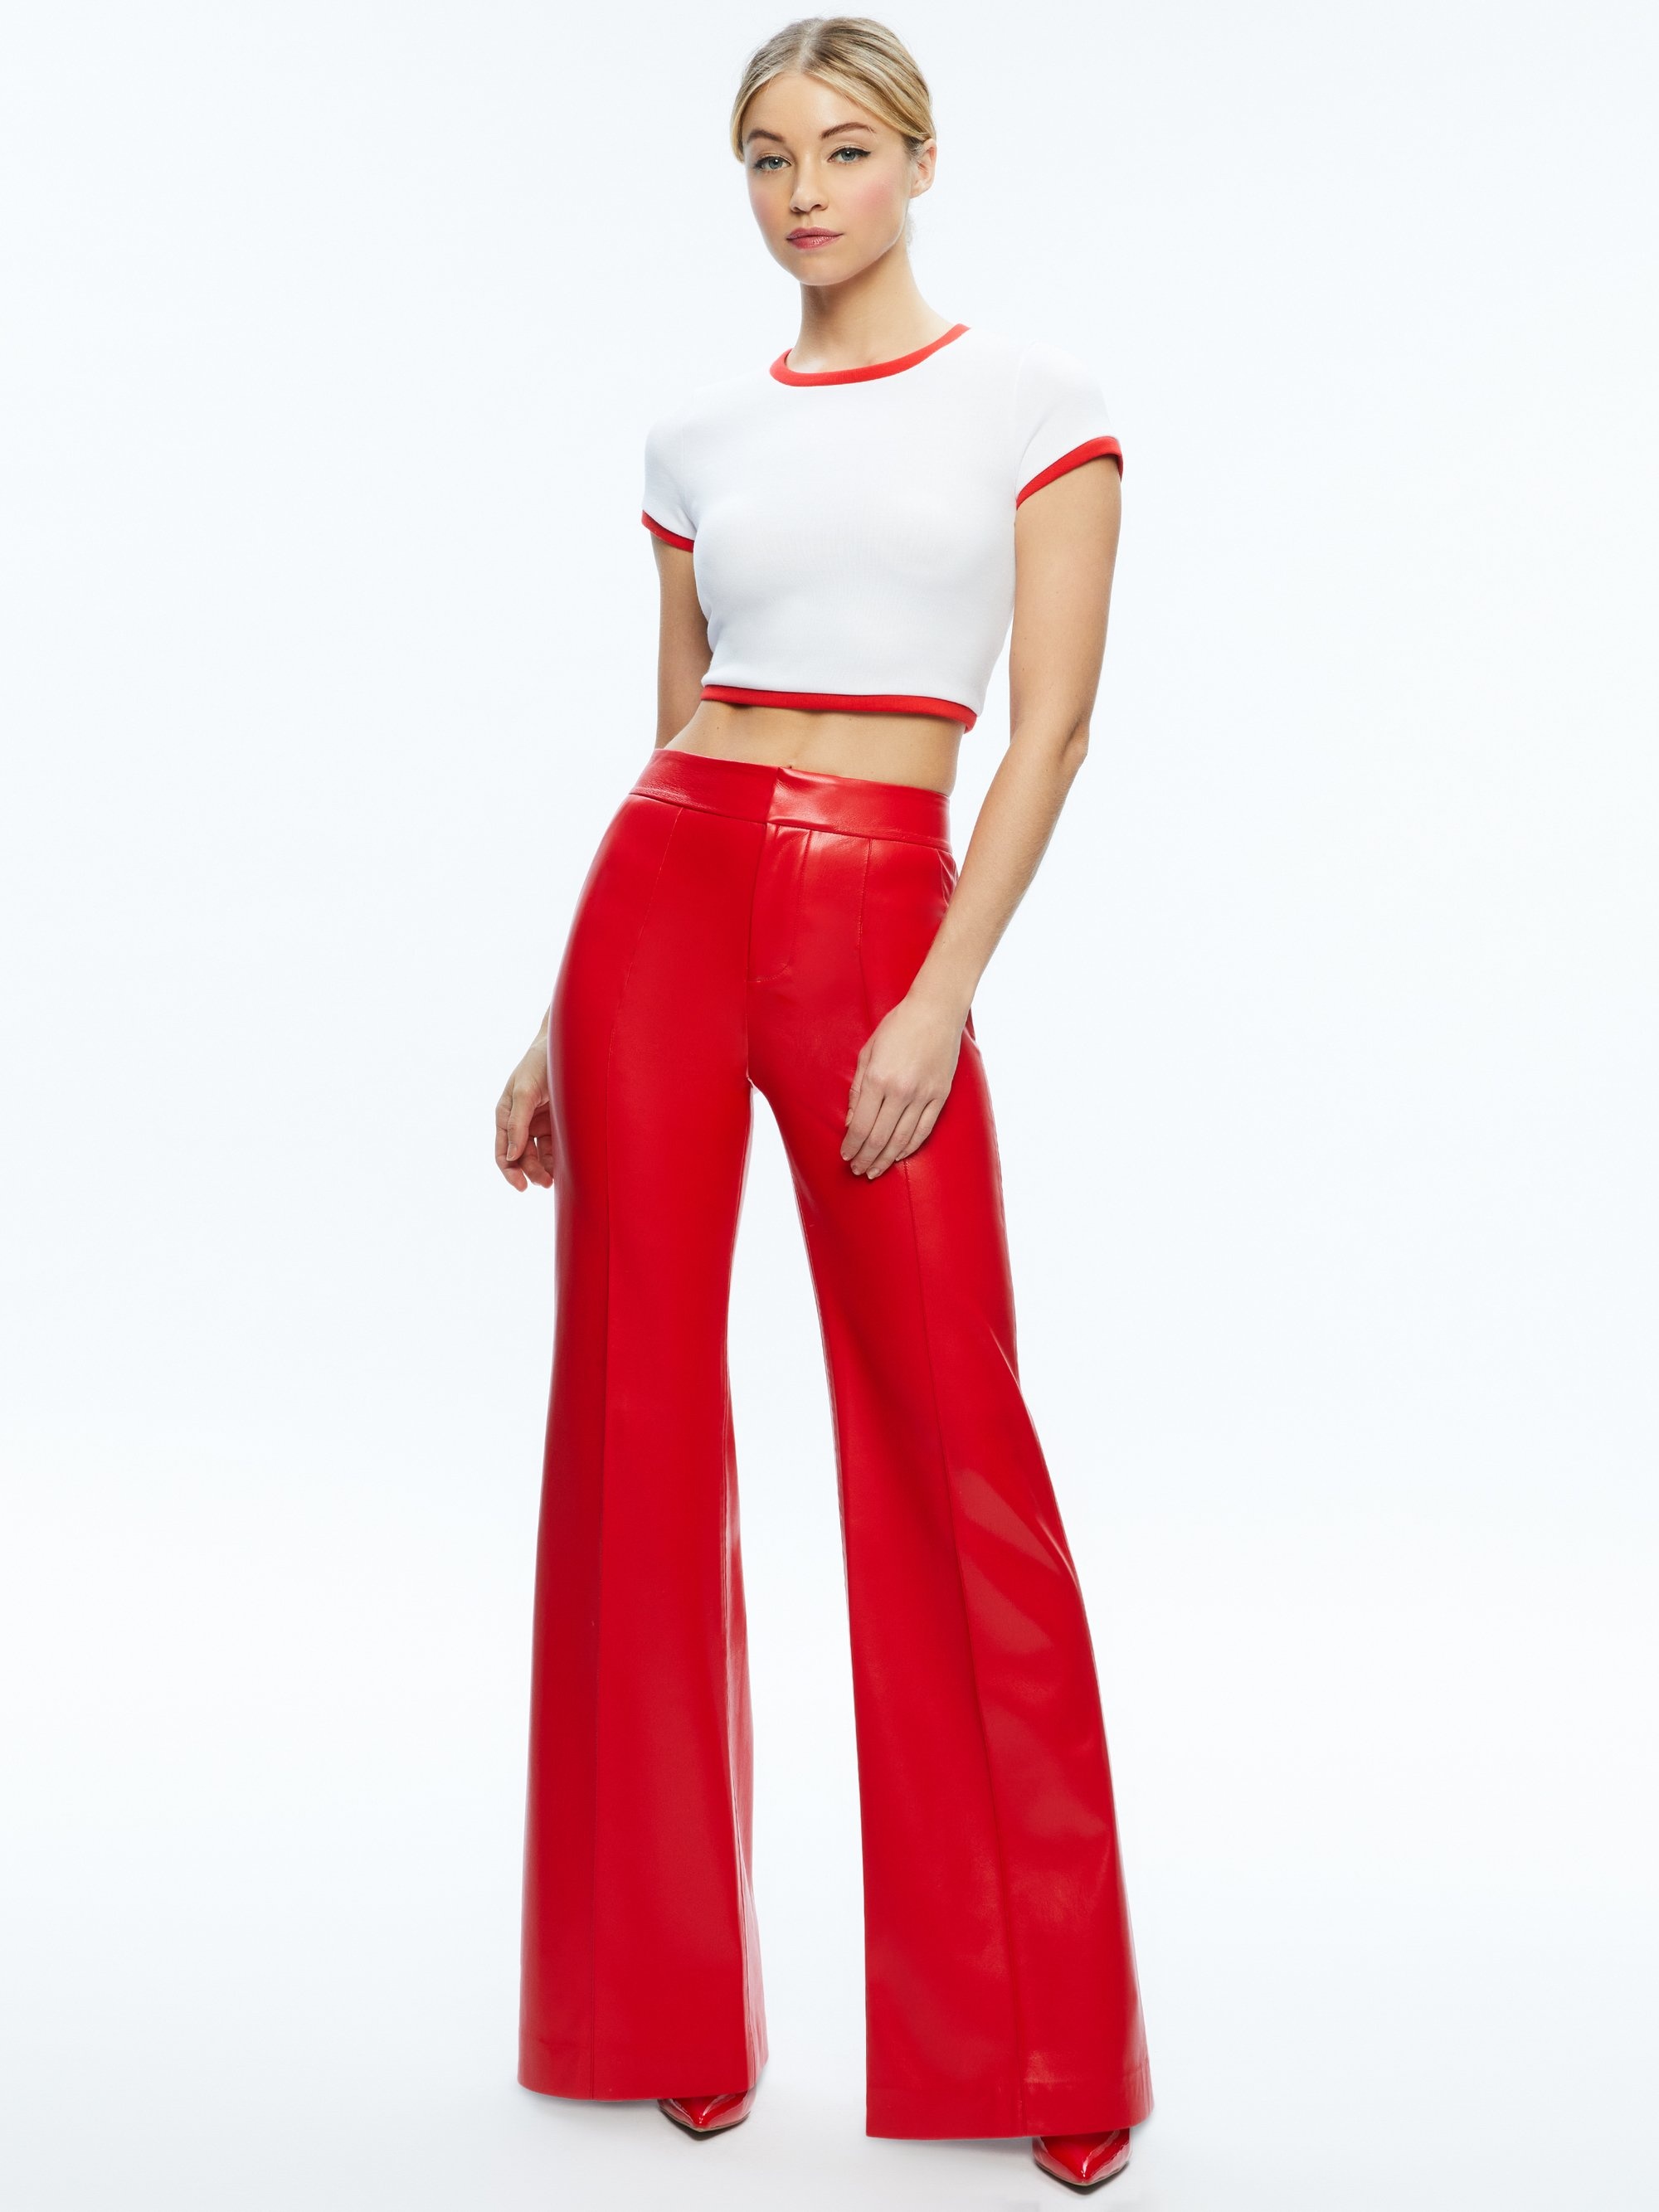 DYLAN HIGH WAISTED VEGAN LEATHER WIDE LEG PANT - 3